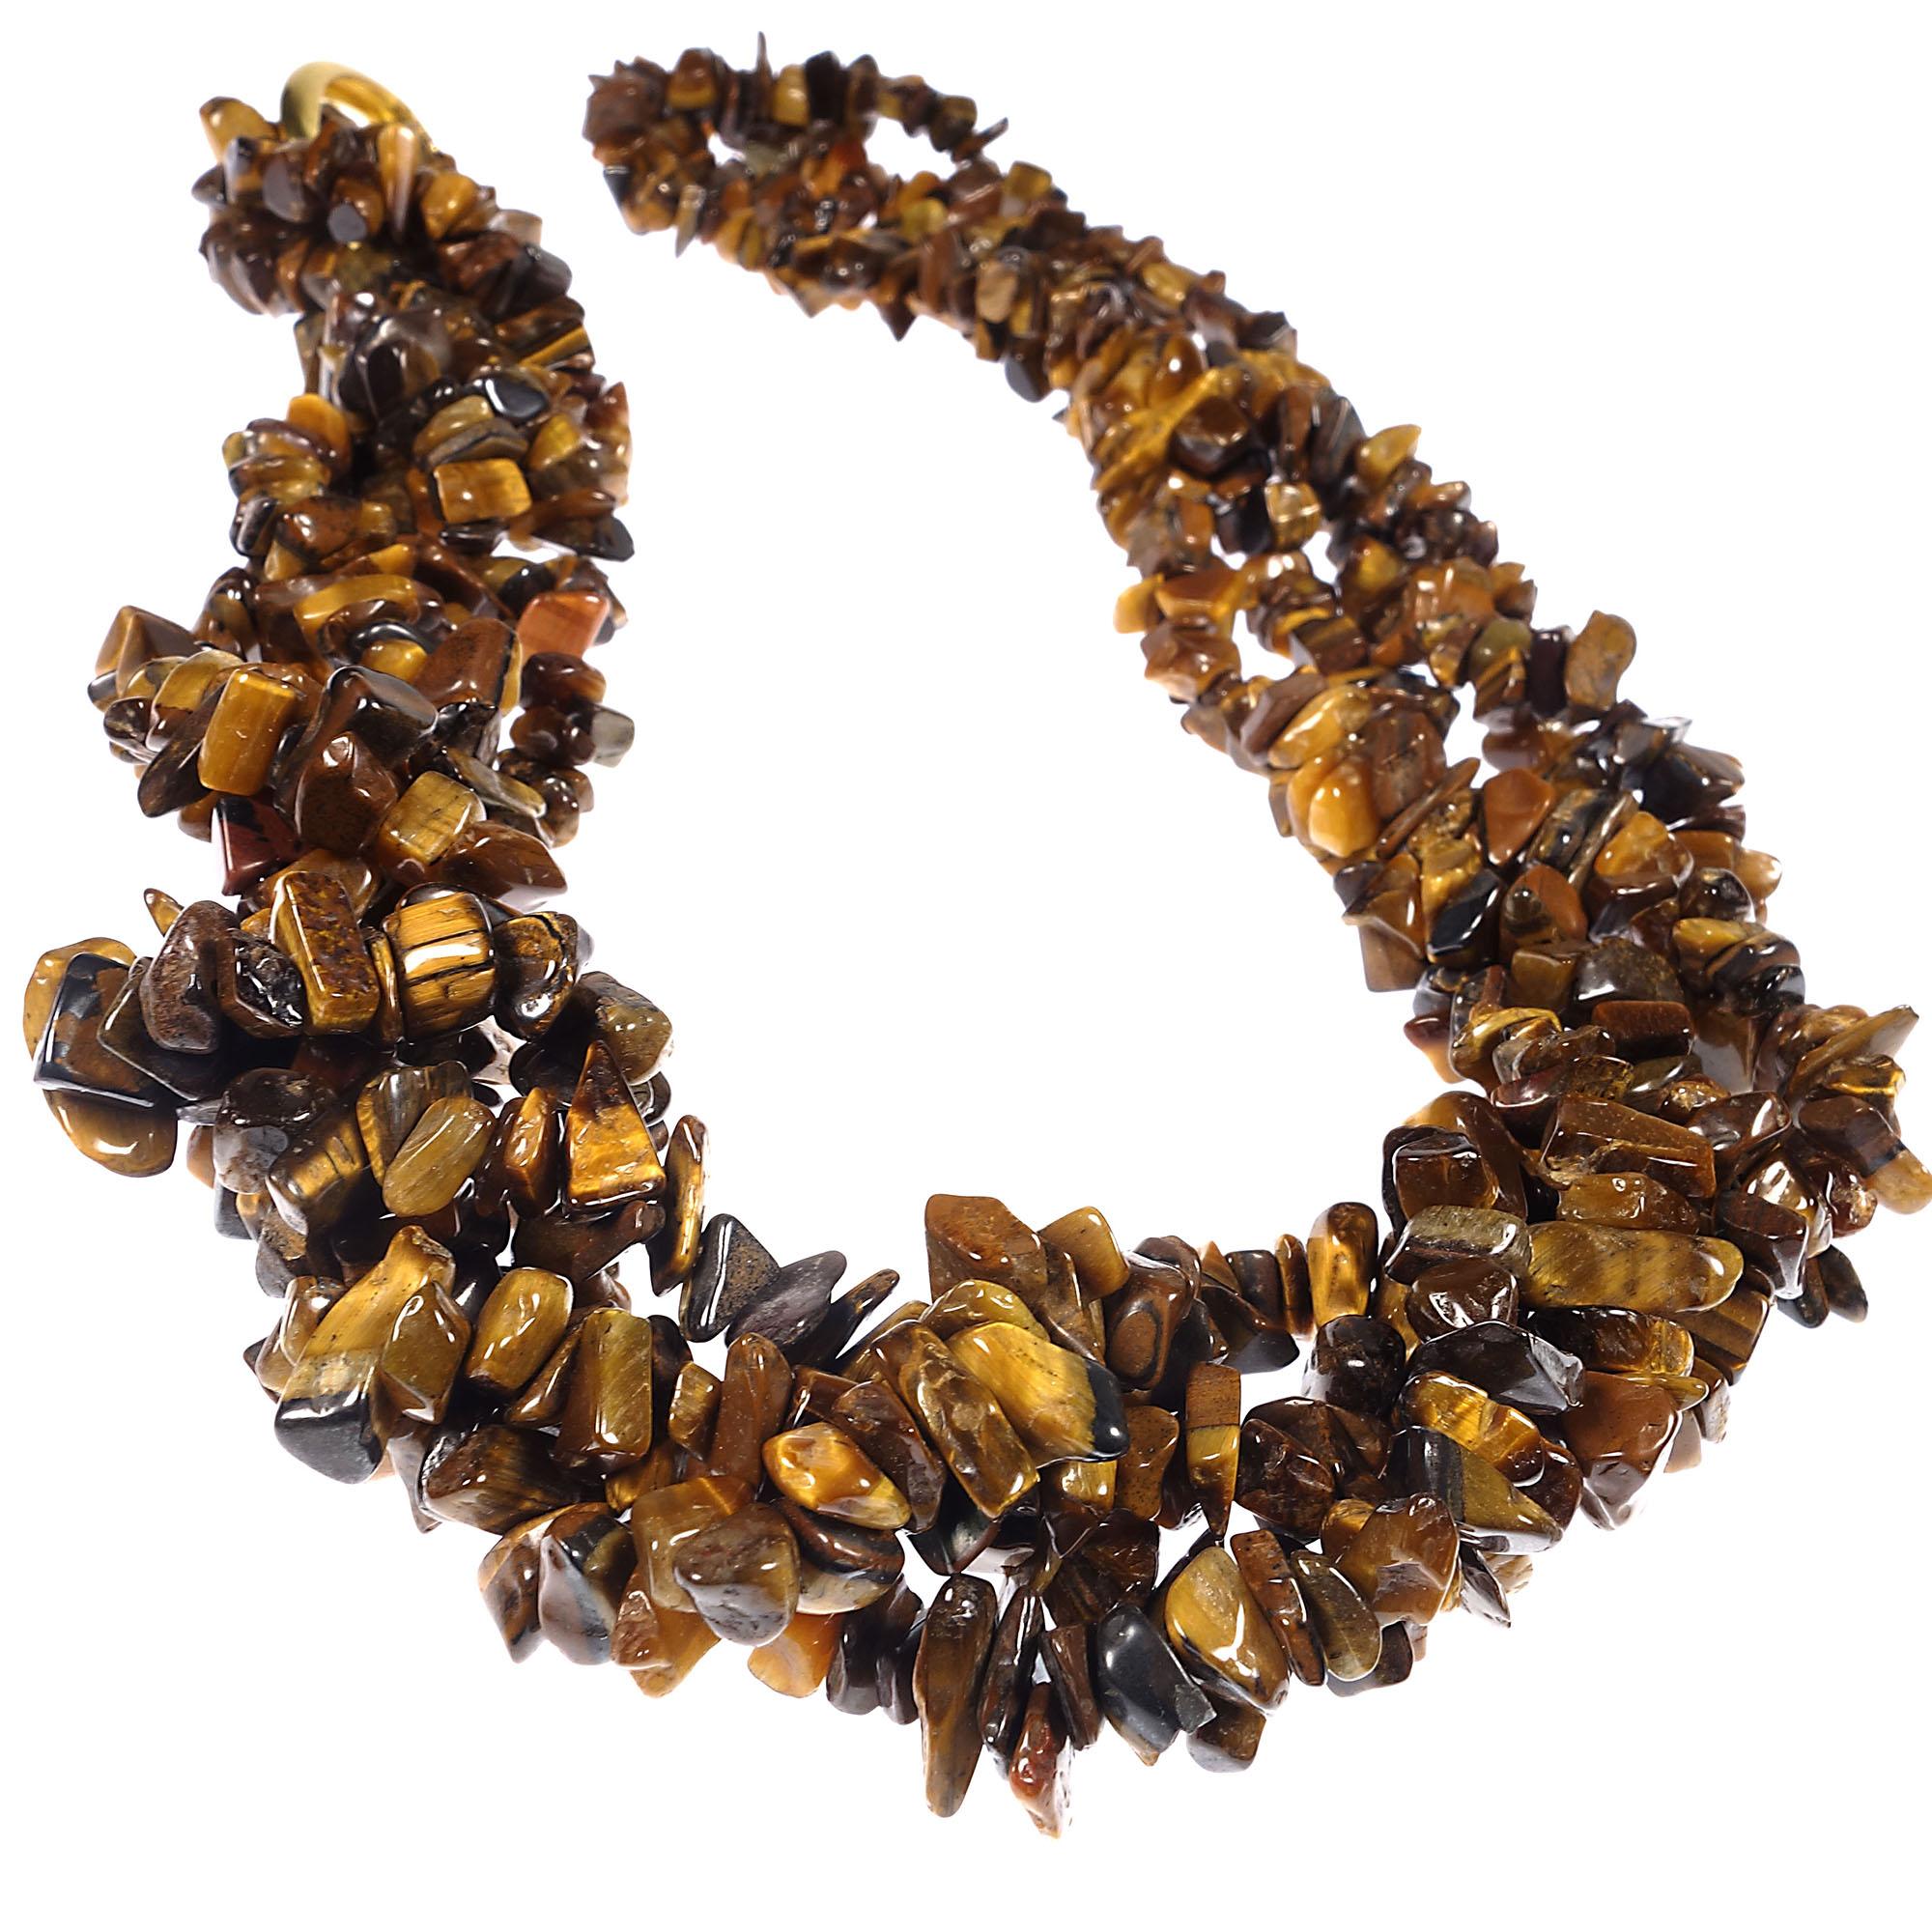 Three 34 inch continuous strands of highly polished Tiger's Eye chips. They can be worn long or doubled and twisted to create a collar effect. Very versatile. These continuous links come with both a gold tone and silver tone clasp. These are perfect